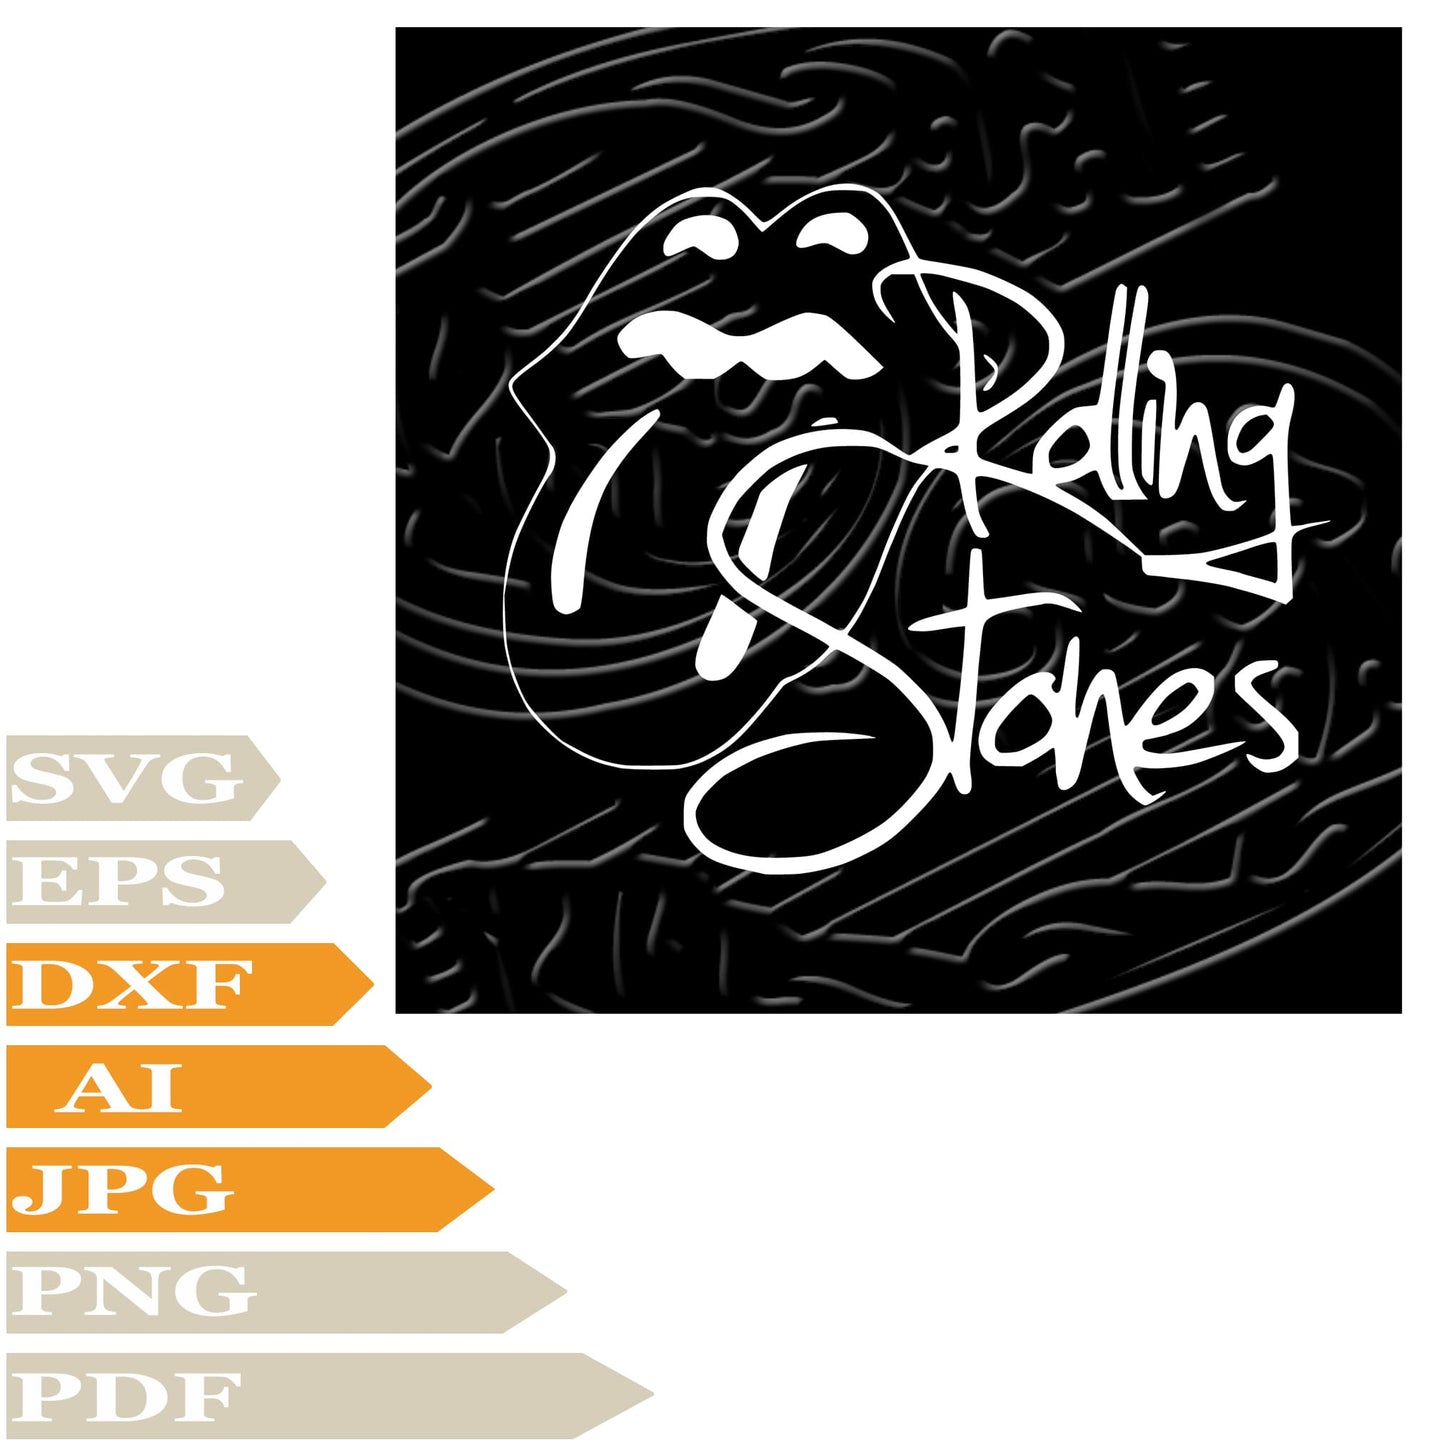 The Rolling Stones, Rolling Stones Logo Svg File, Image Cut, Png, For Tattoo, Silhouette, Digital Vector Download, Cut File, Clipart, For Cricut